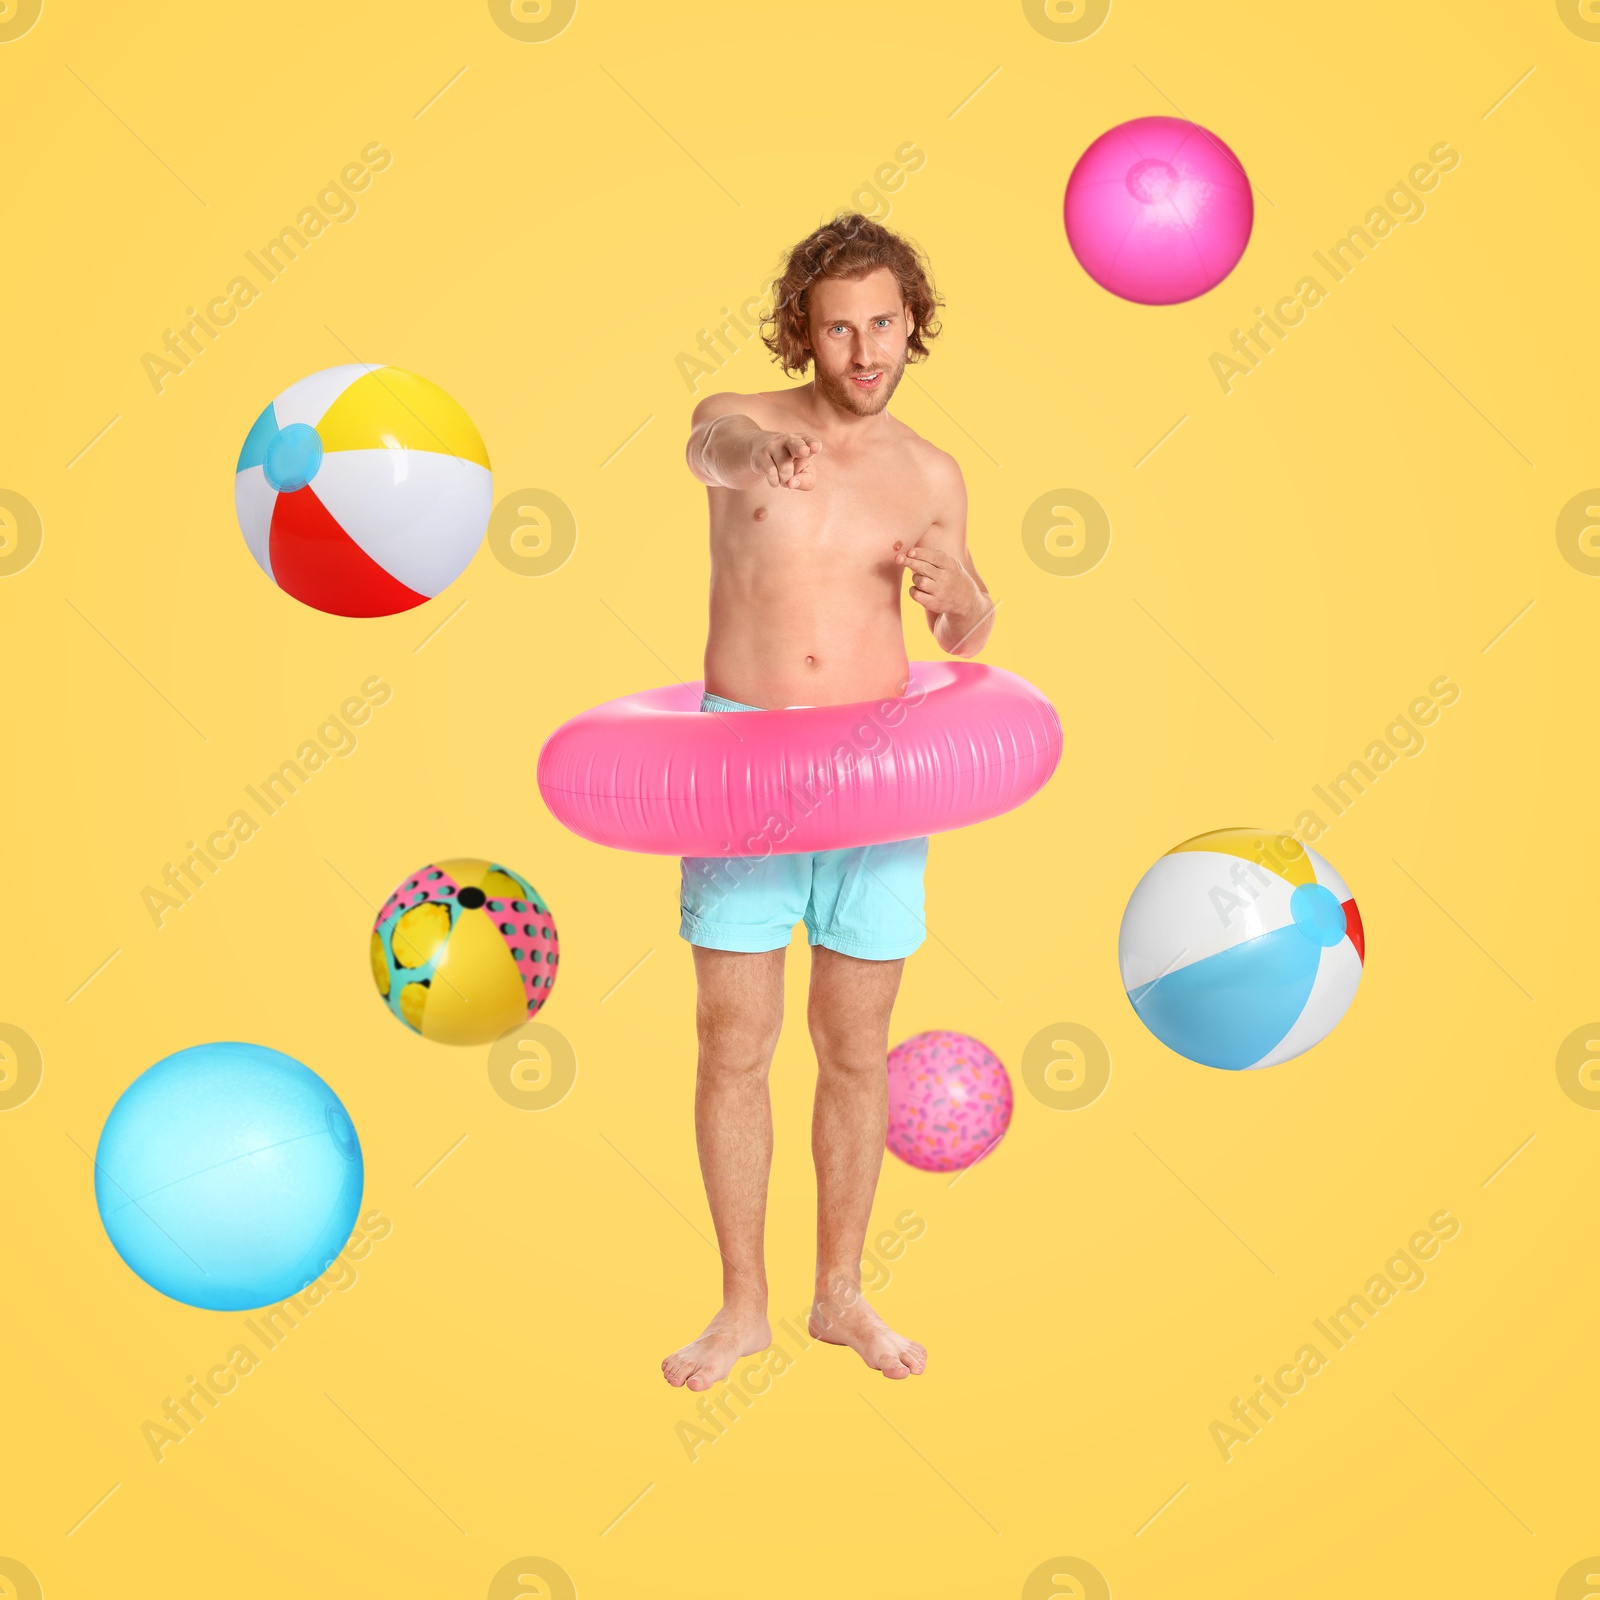 Image of Happy man with inflatable ring among falling beach balls on golden background. Summer vibe